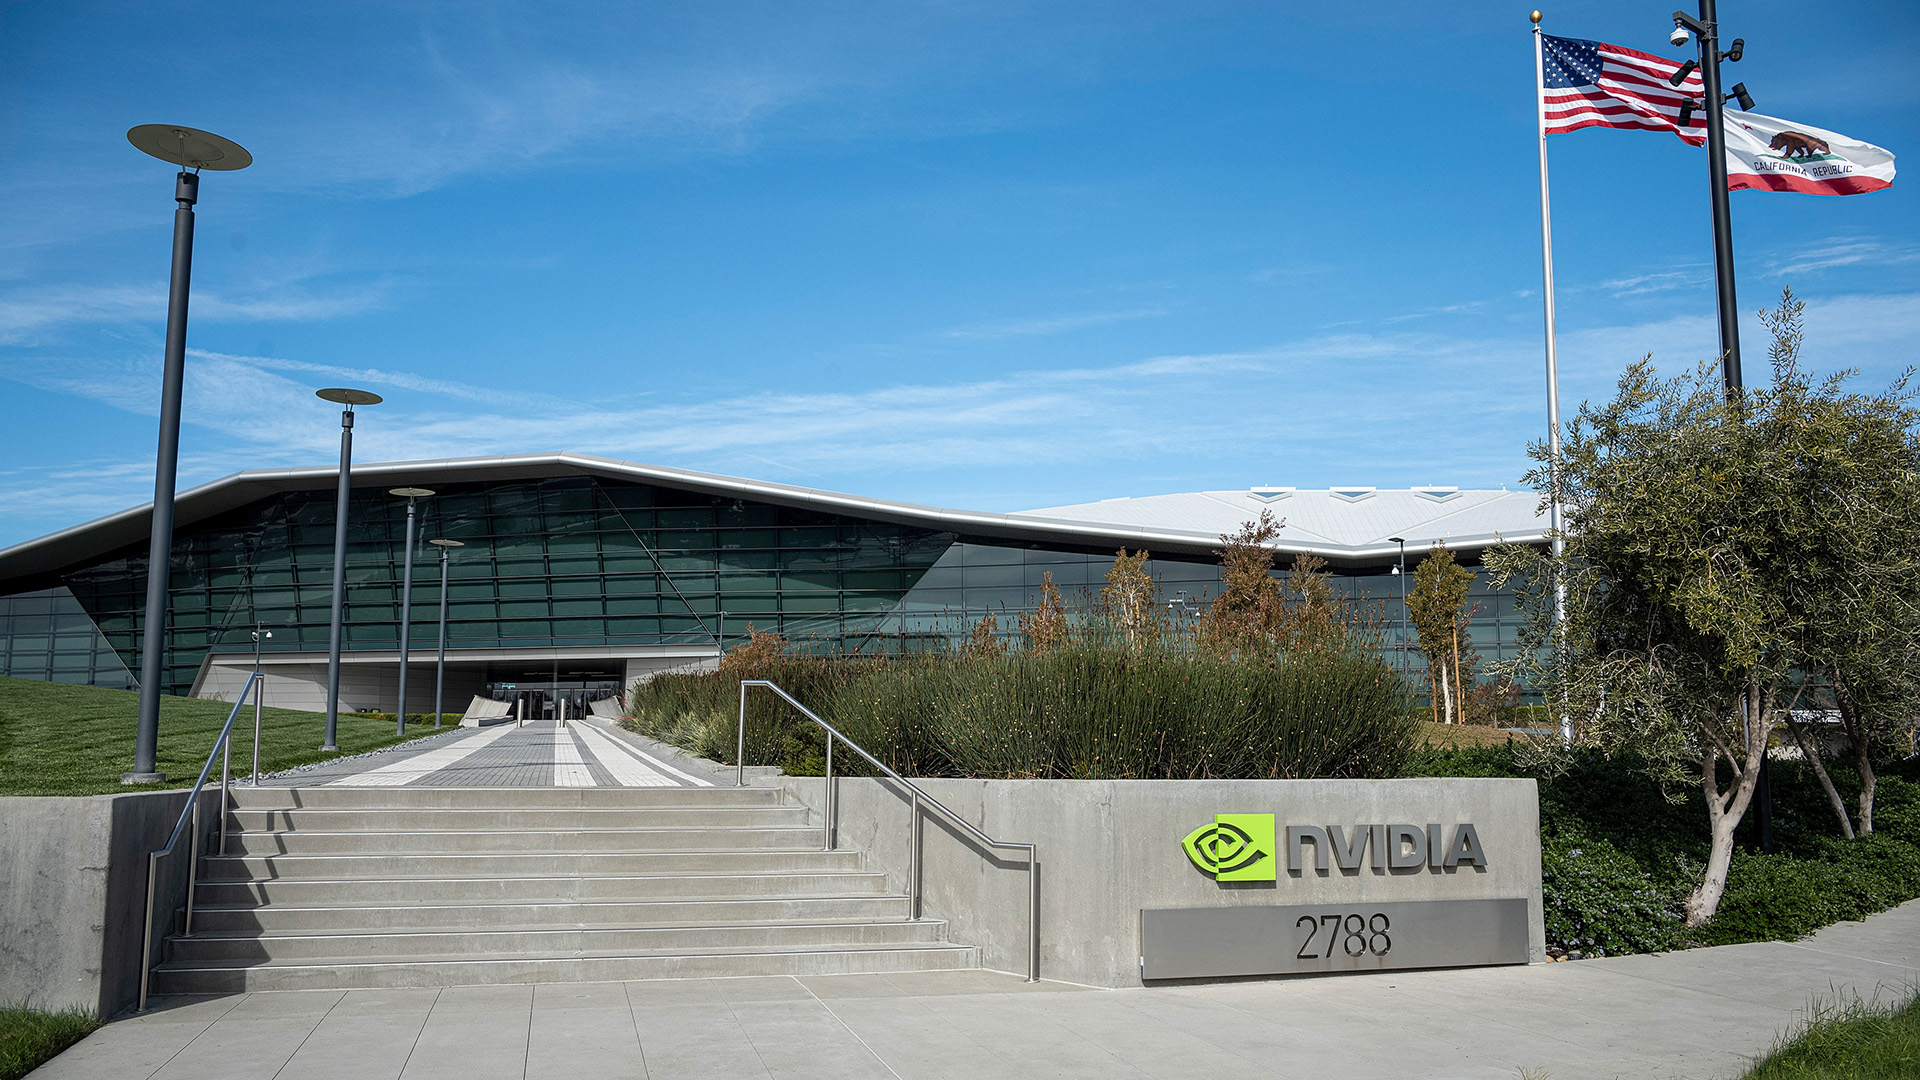  Nvidia fined $5.5M for failing to mention crypto miners were some of its biggest customers for gaming GPUs 